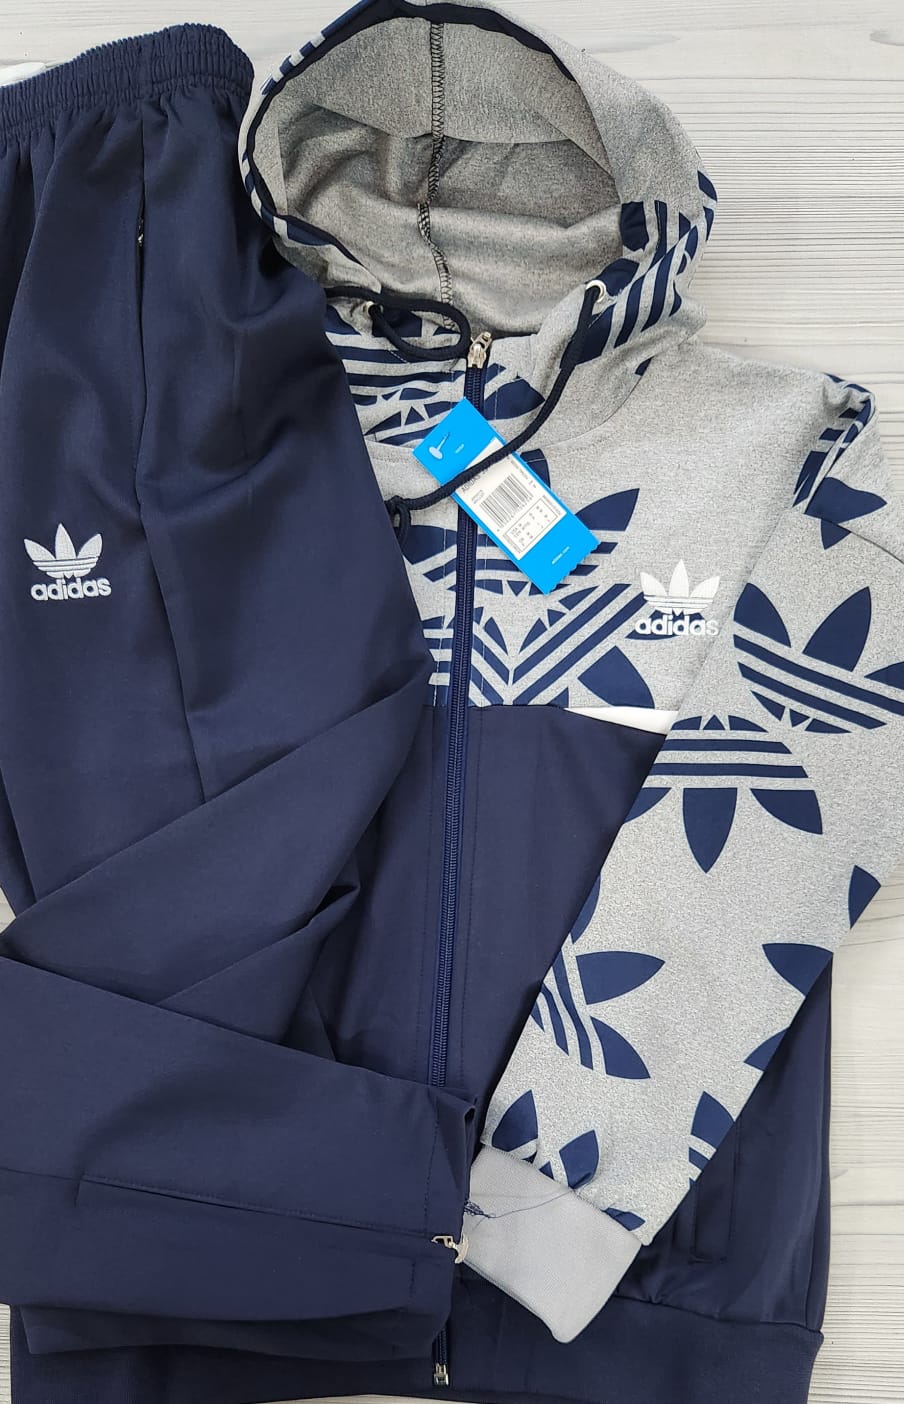 Adidas Full Track Suit – Full Print – Suppliers Marketplace